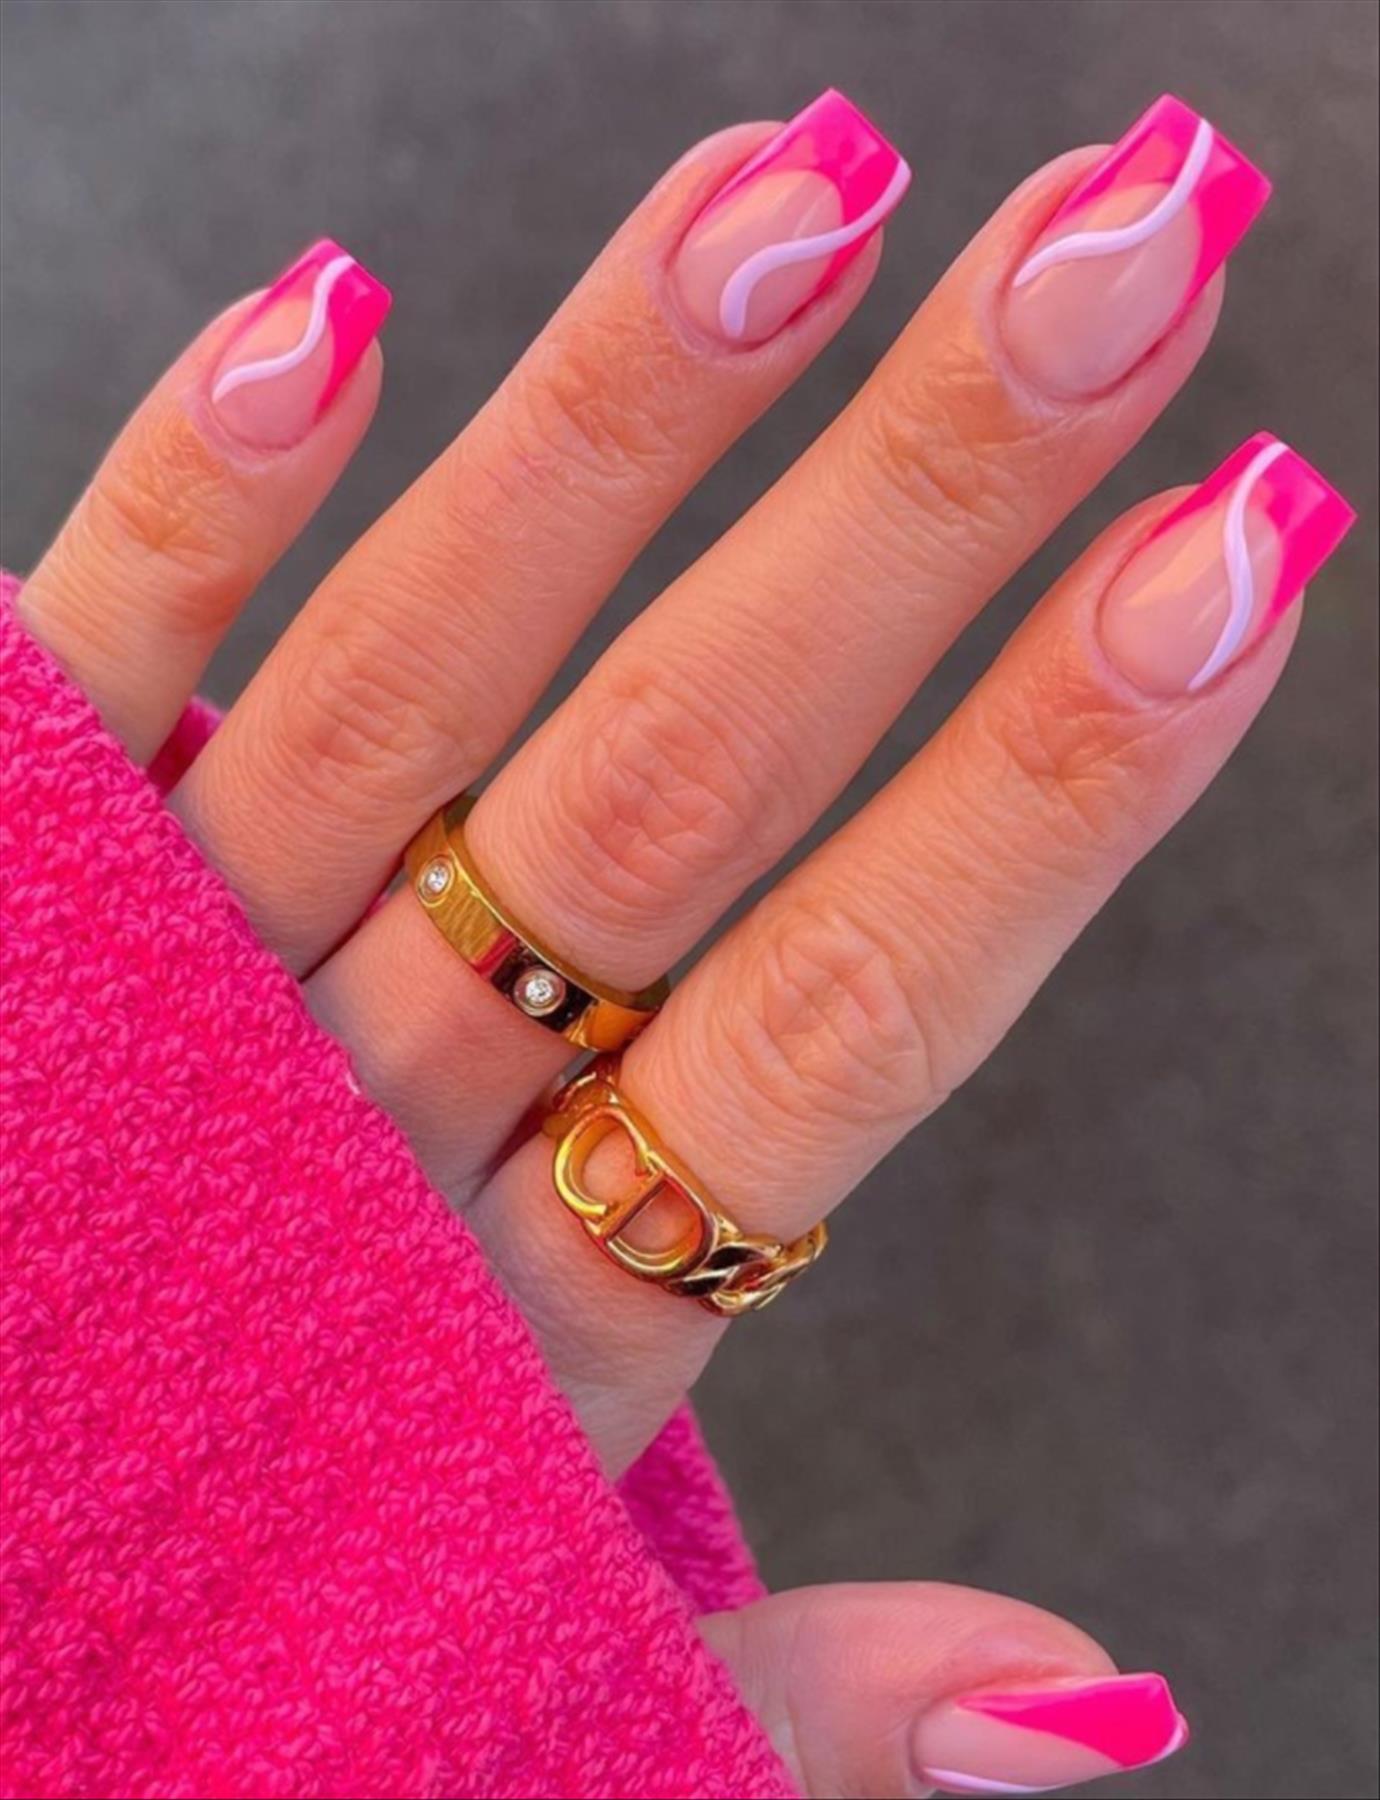  Unique pastel swirl nails for cute spring manicures 2022